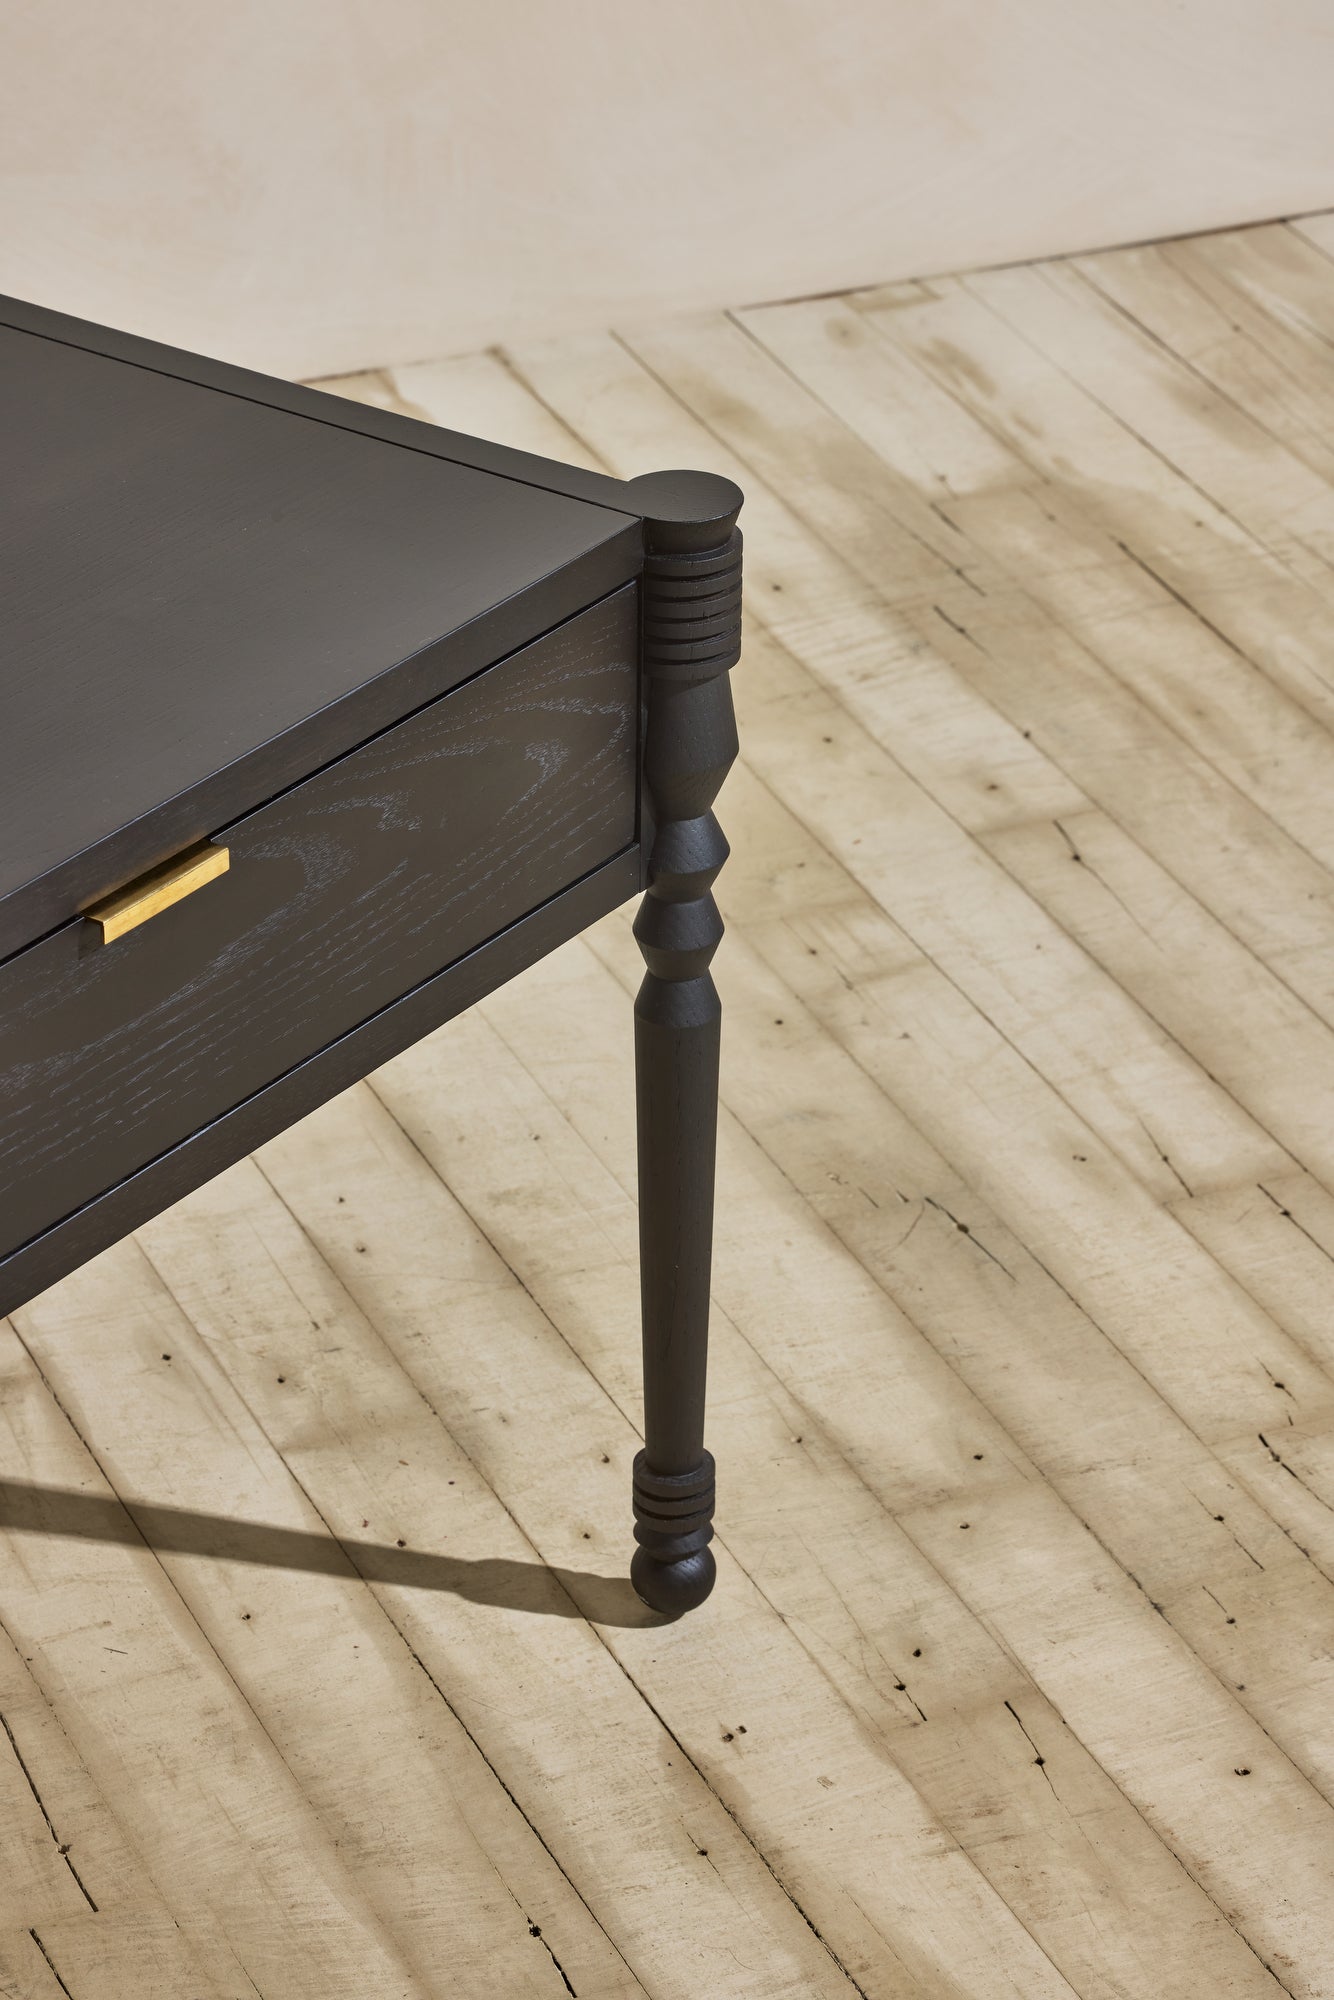 Close up of geometric leg turnings in ebony finish from Disc Side Table.